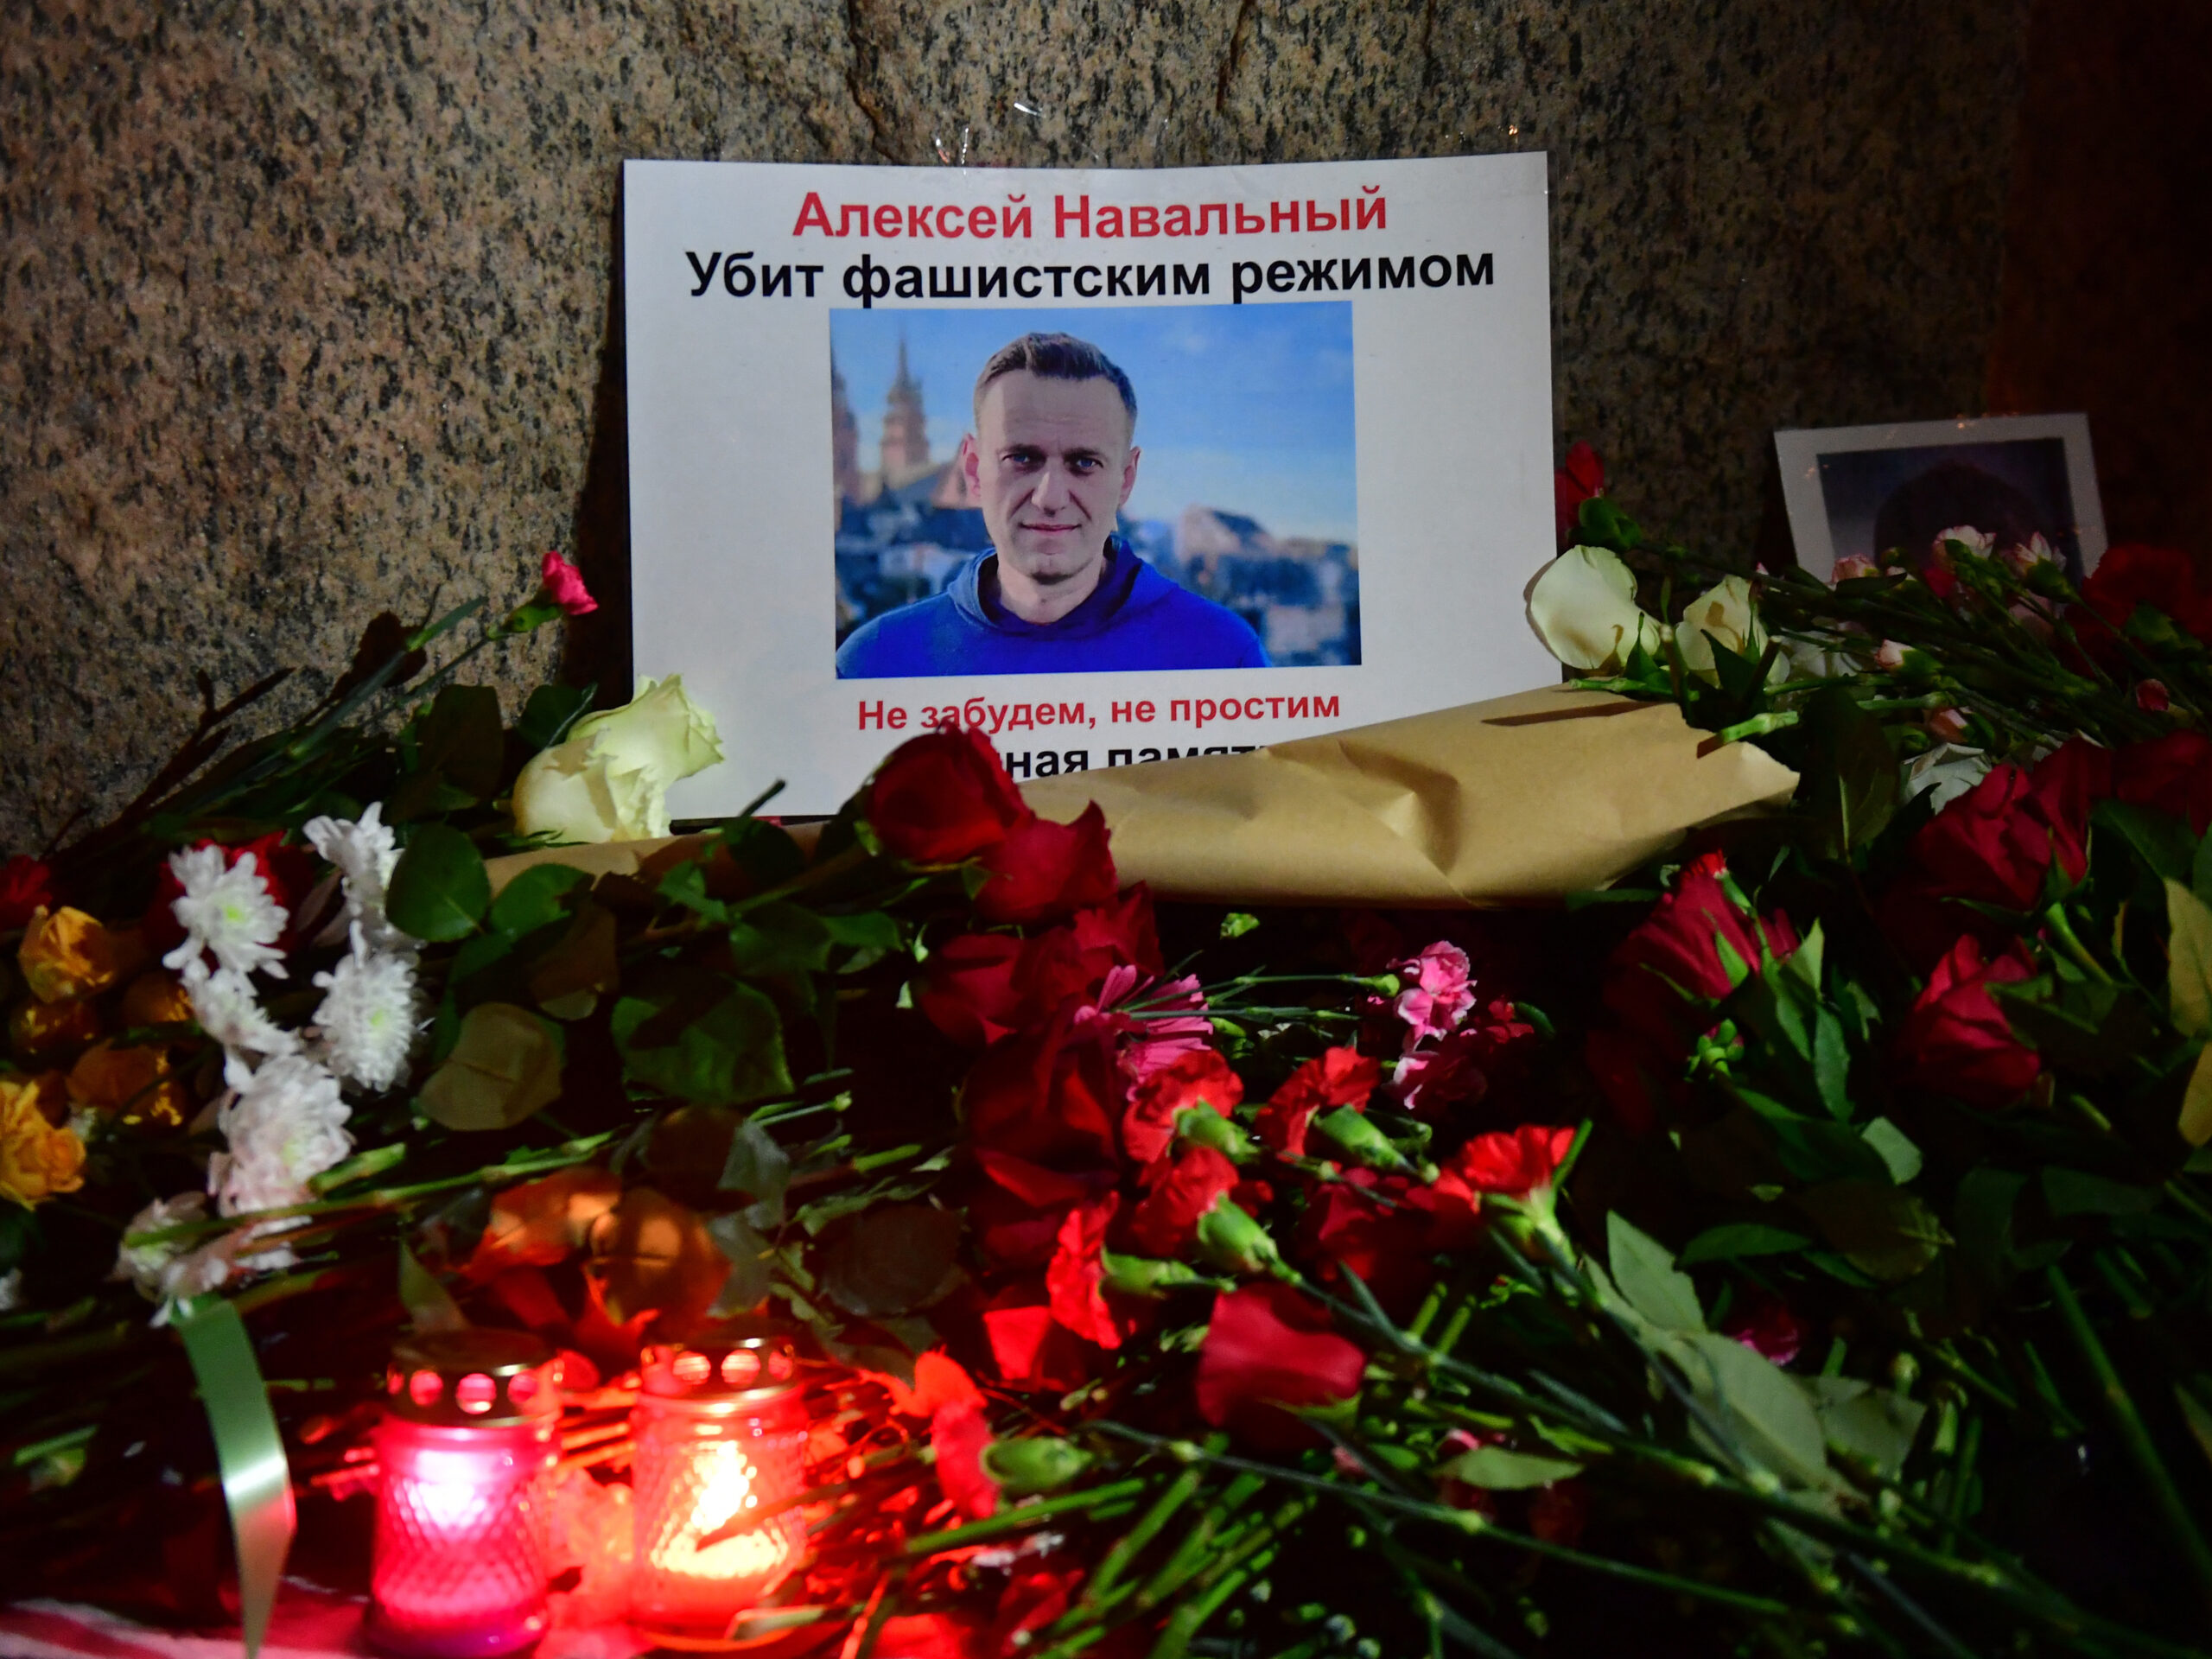 Navalny’s funeral draws police presence; over 100 in Gaza killed while seeking aid